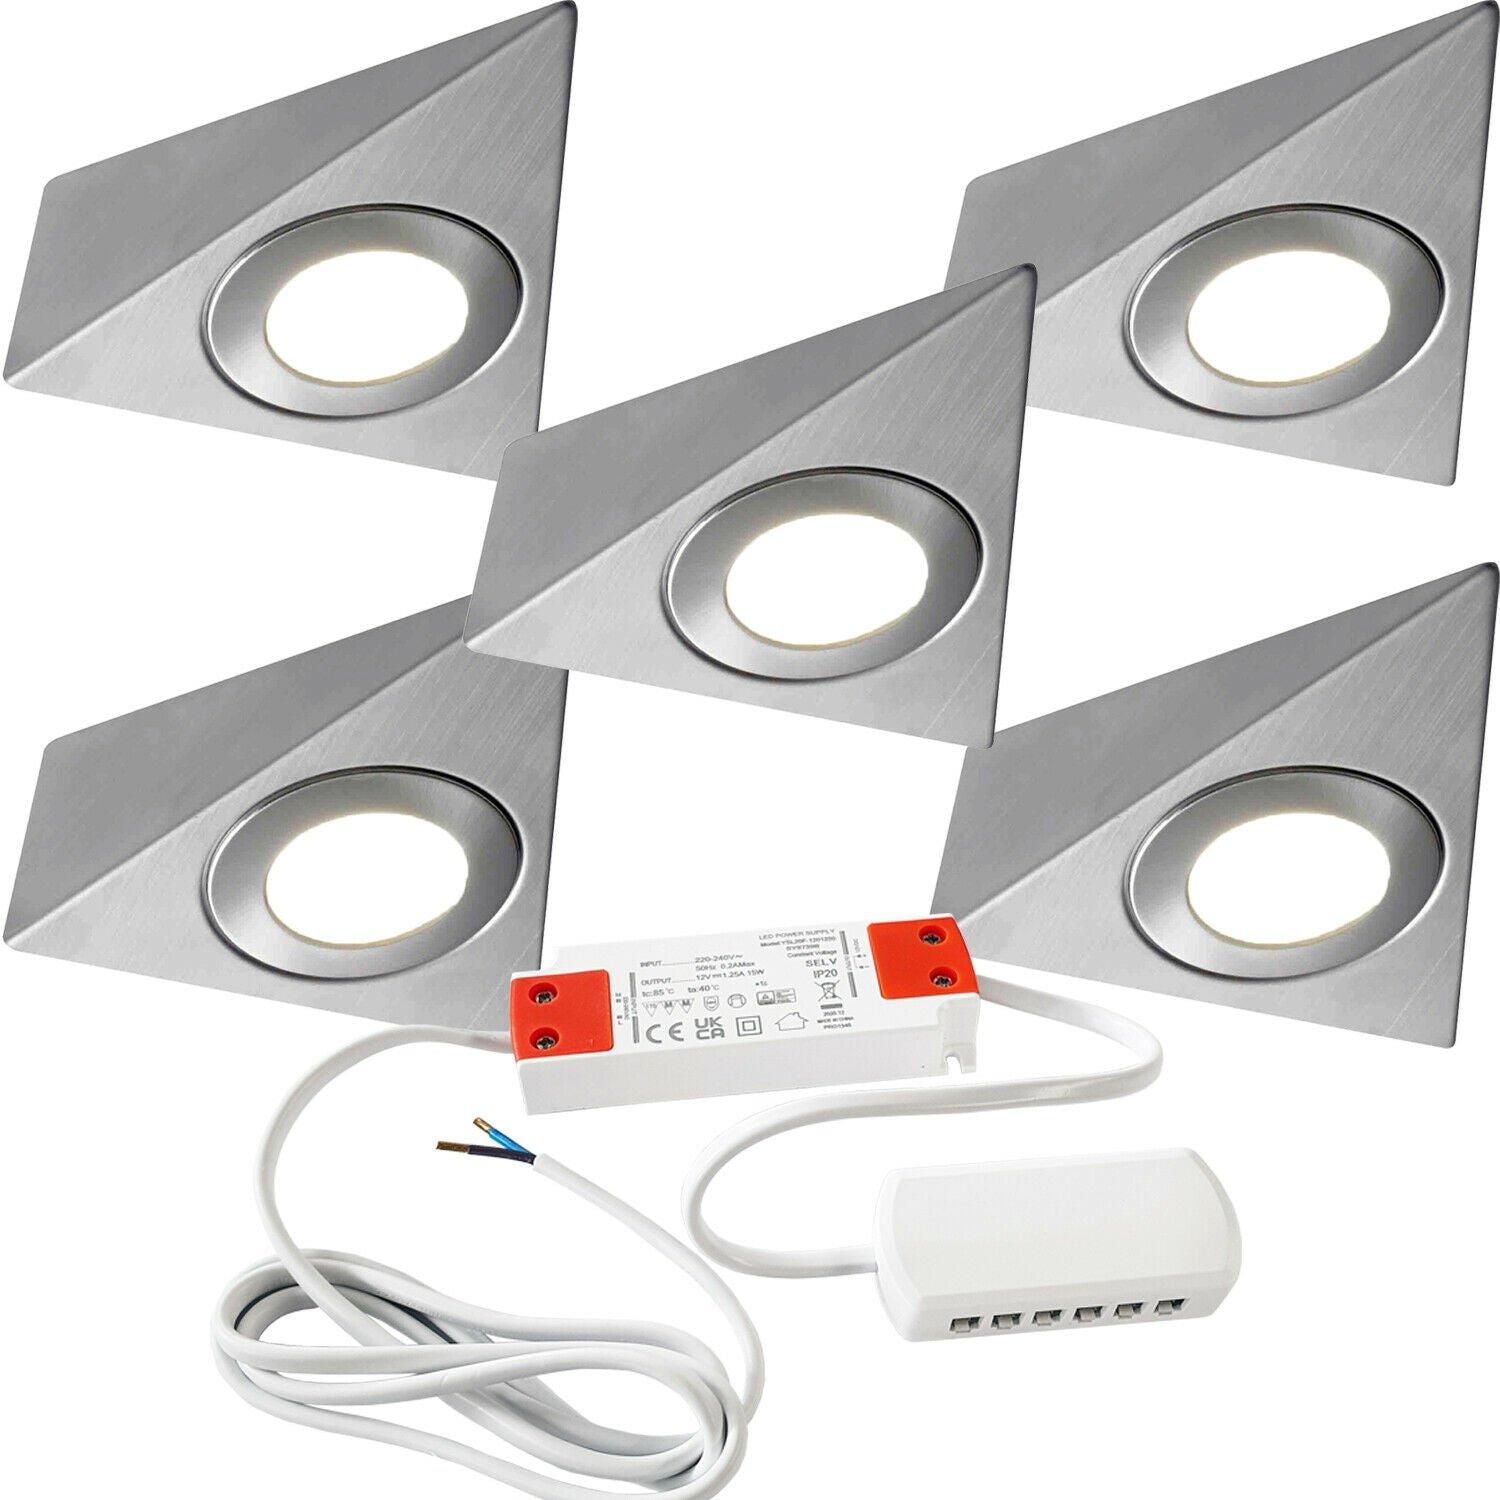 5x BRUSHED NICKEL Pyramid Surface Under Cabinet Kitchen Light & Driver Kit - Natural White LED